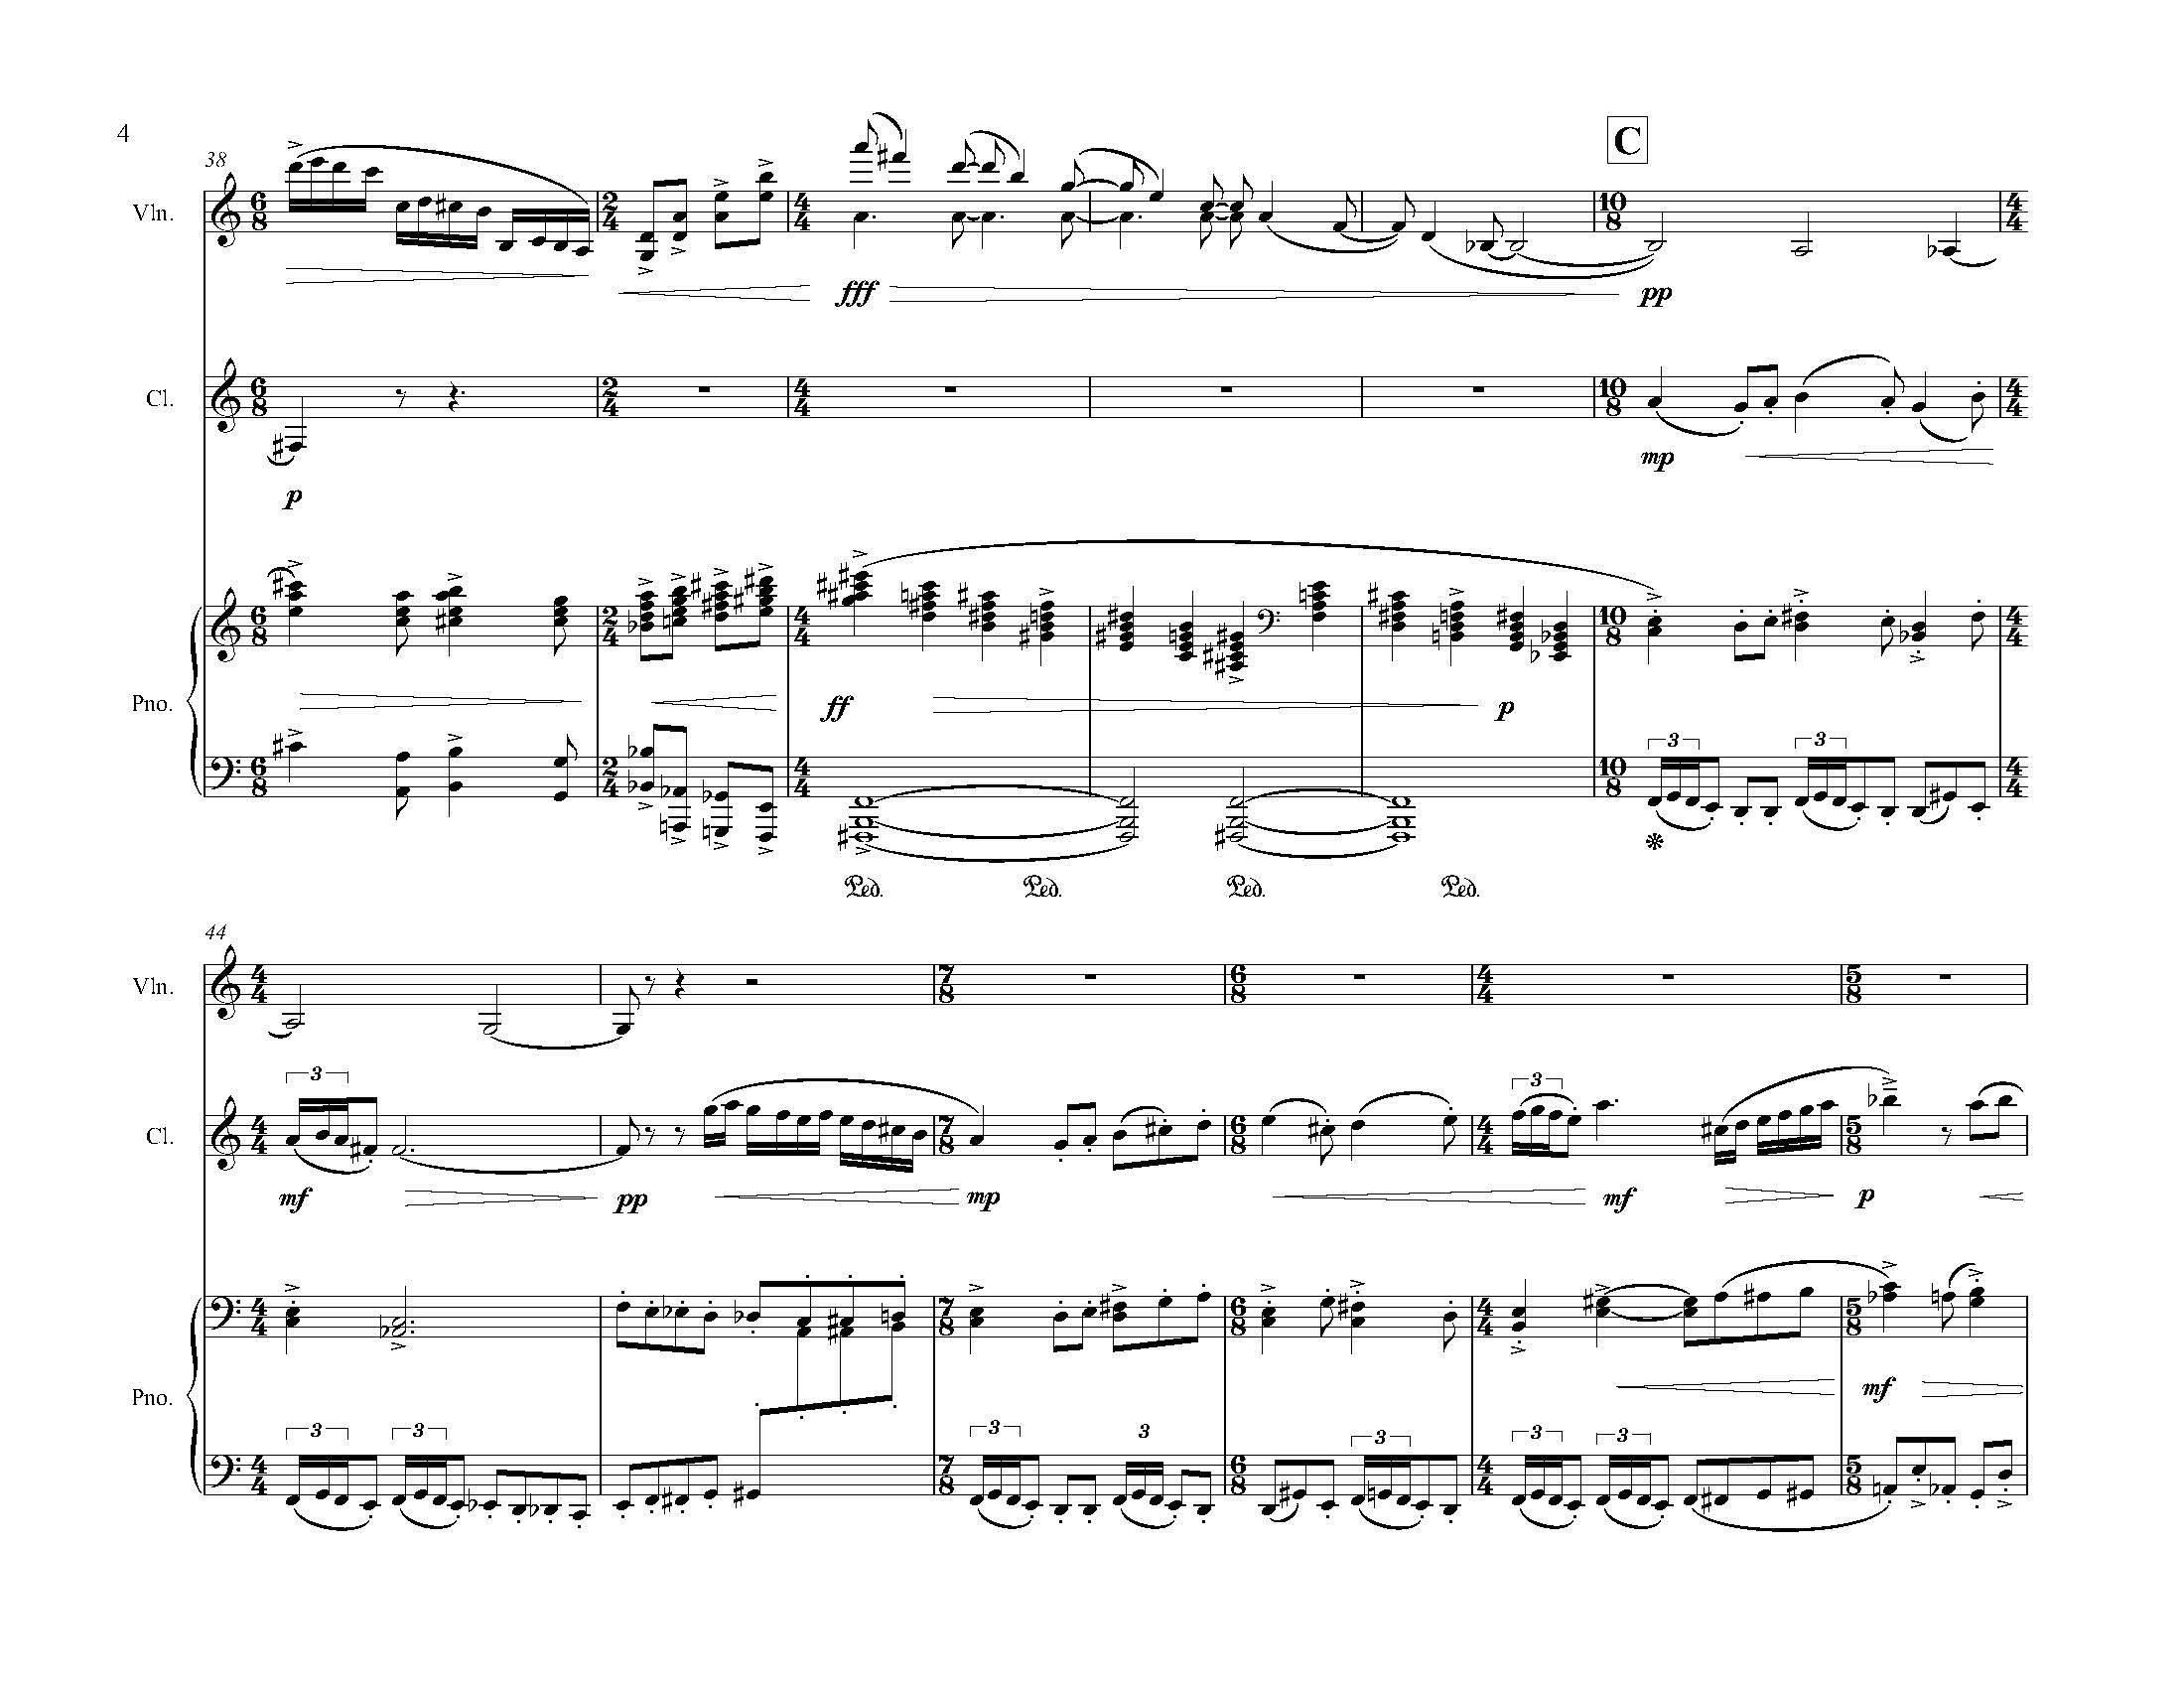 Teach the Torches to Burn Bright - Complete Score_Page_10.jpg